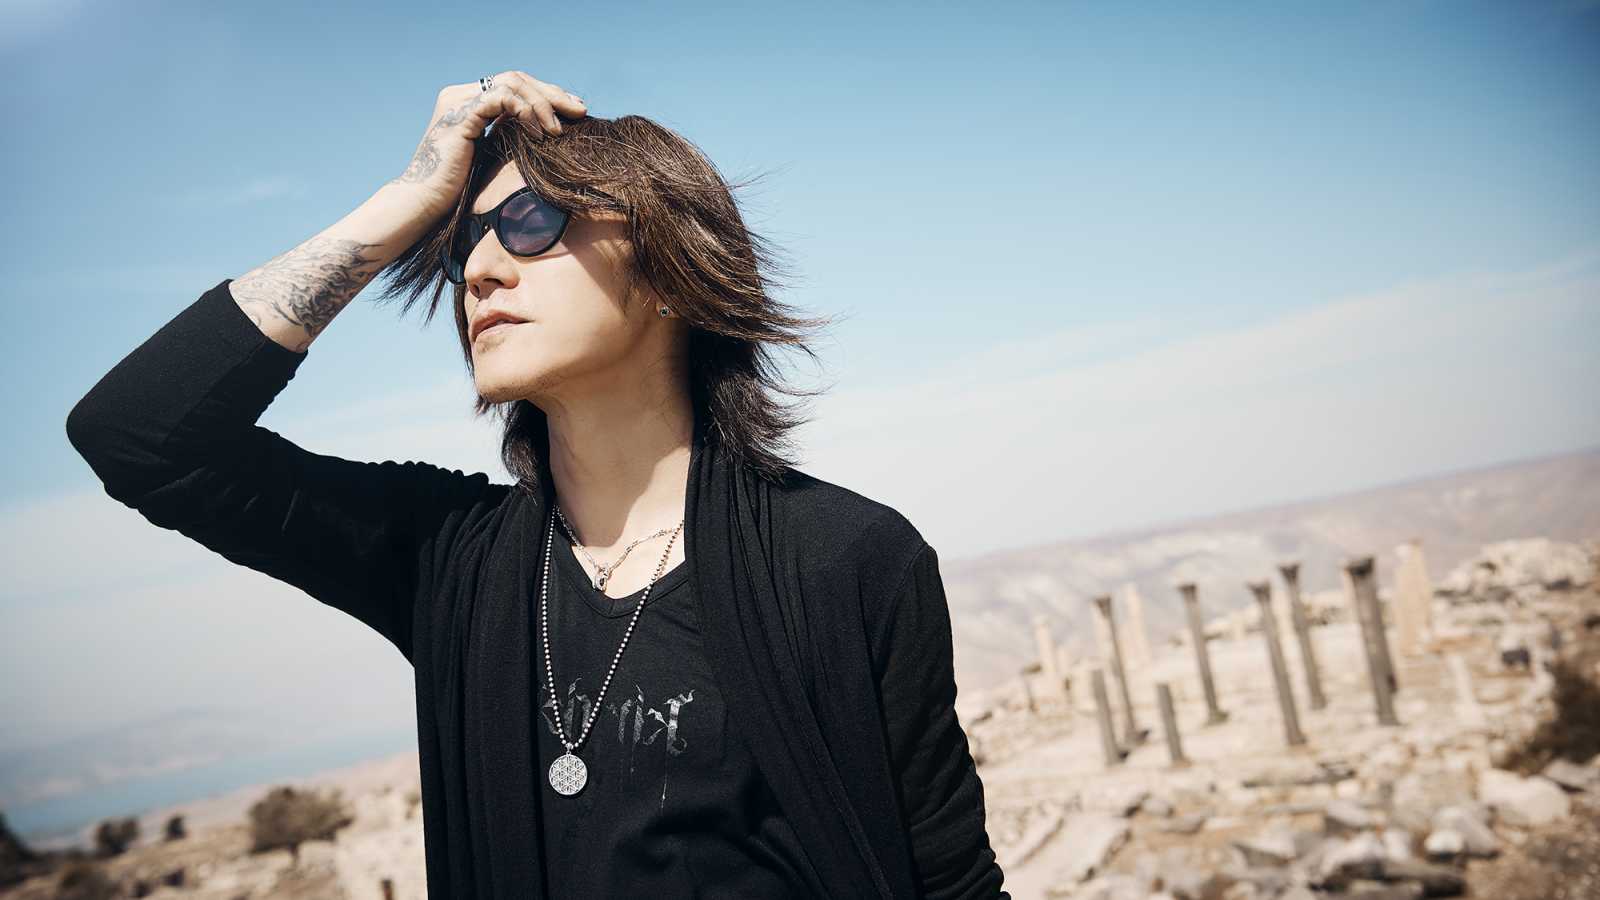 Details on SUGIZO's First Live Streaming Concert © SUGIZO. All rights reserved.